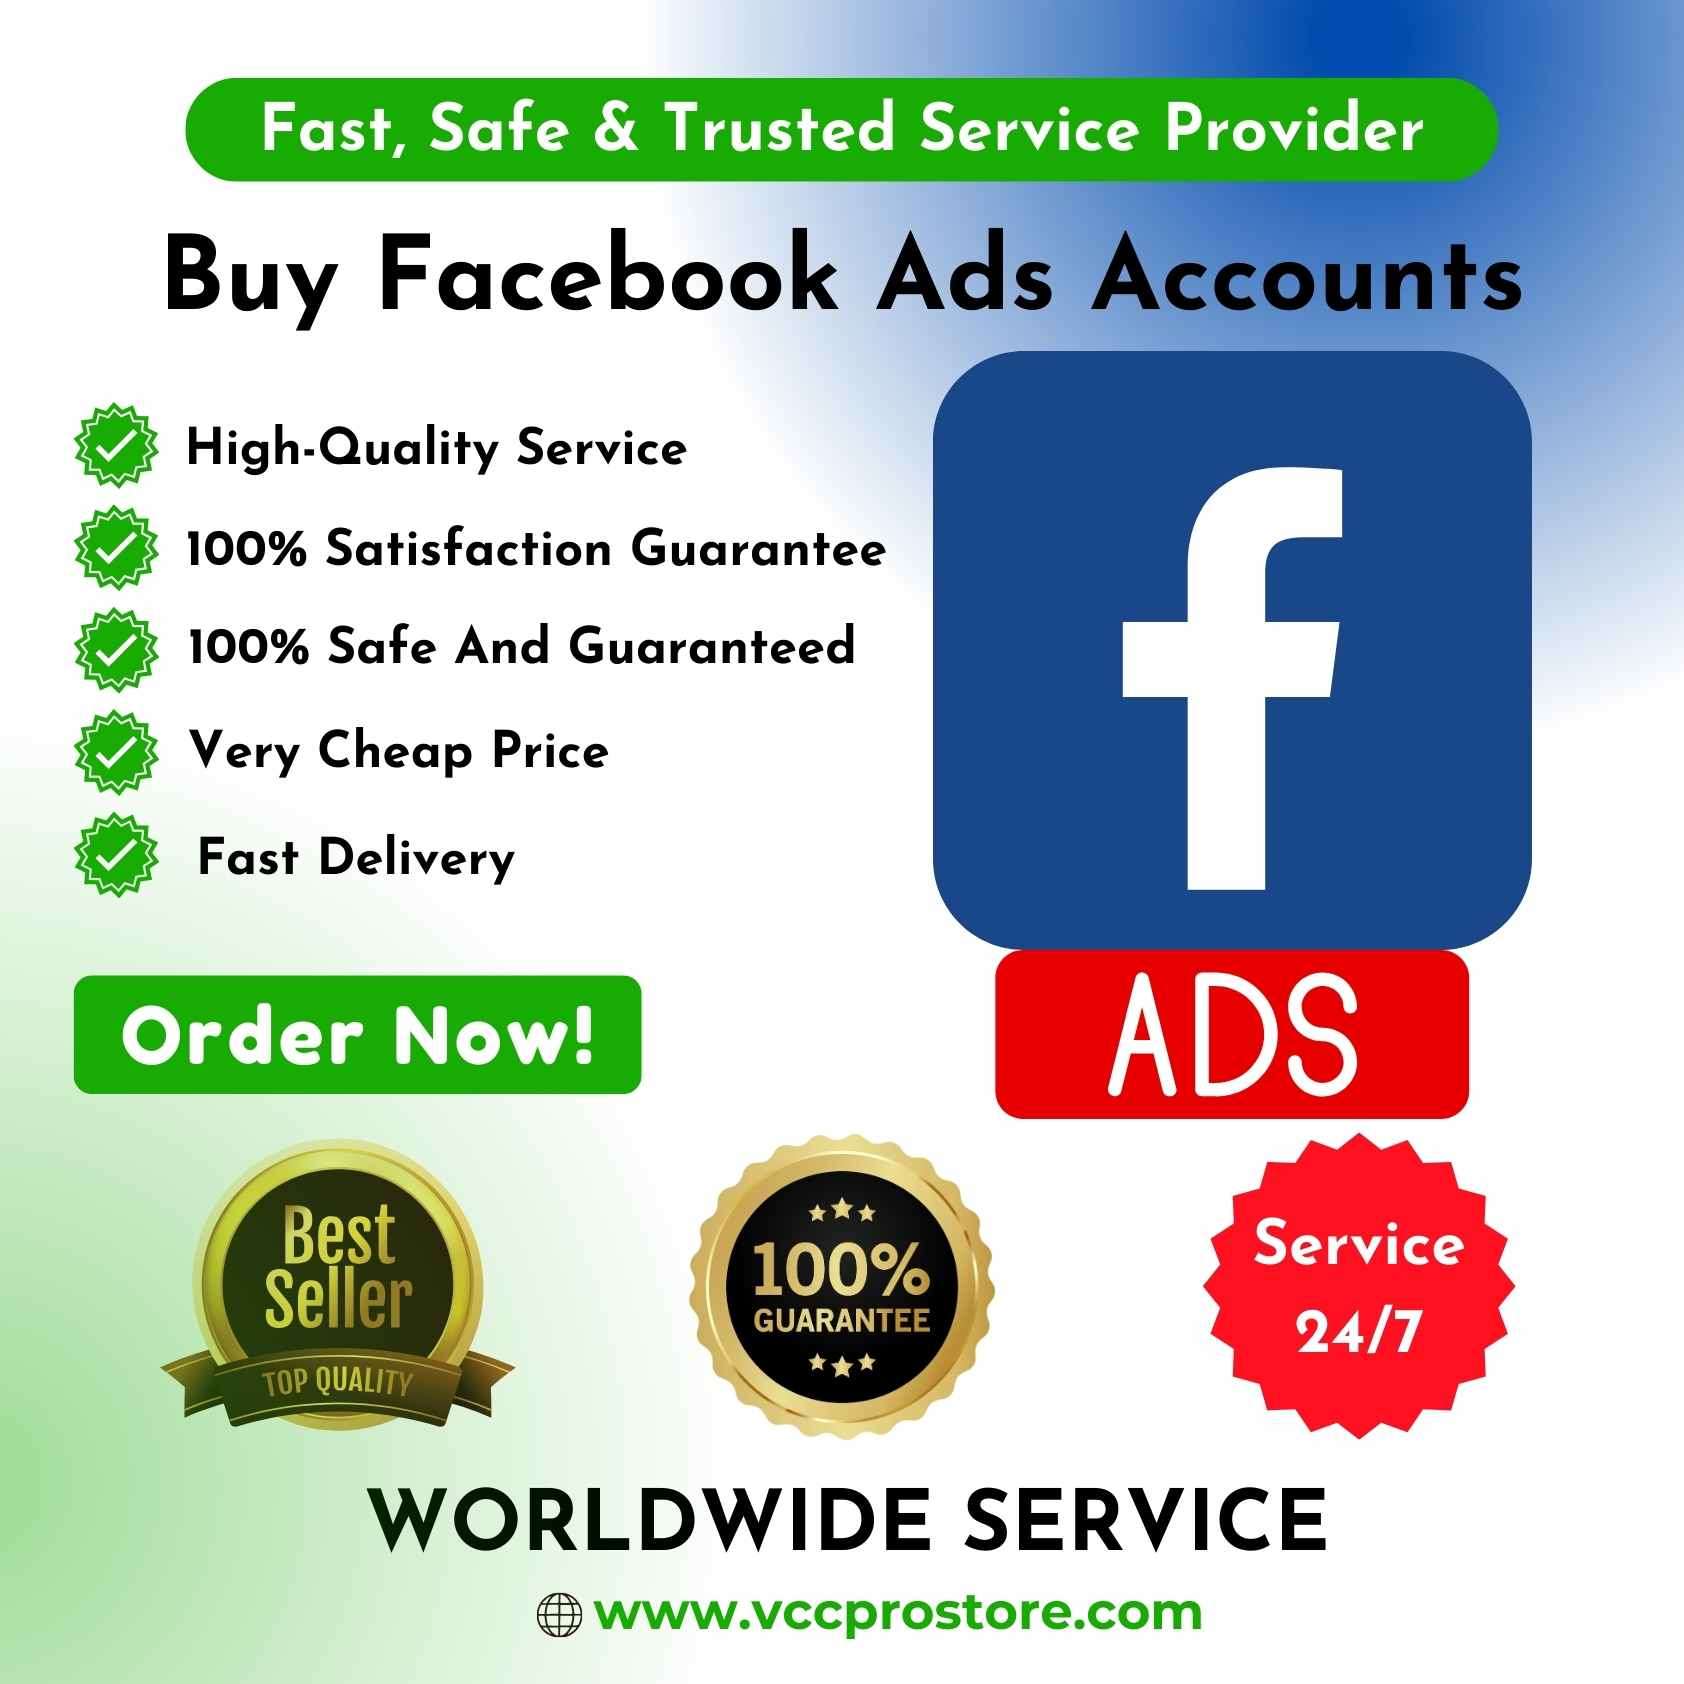 Buy Facebook Ads Accounts - 100% Best PVA, Aged, Verified